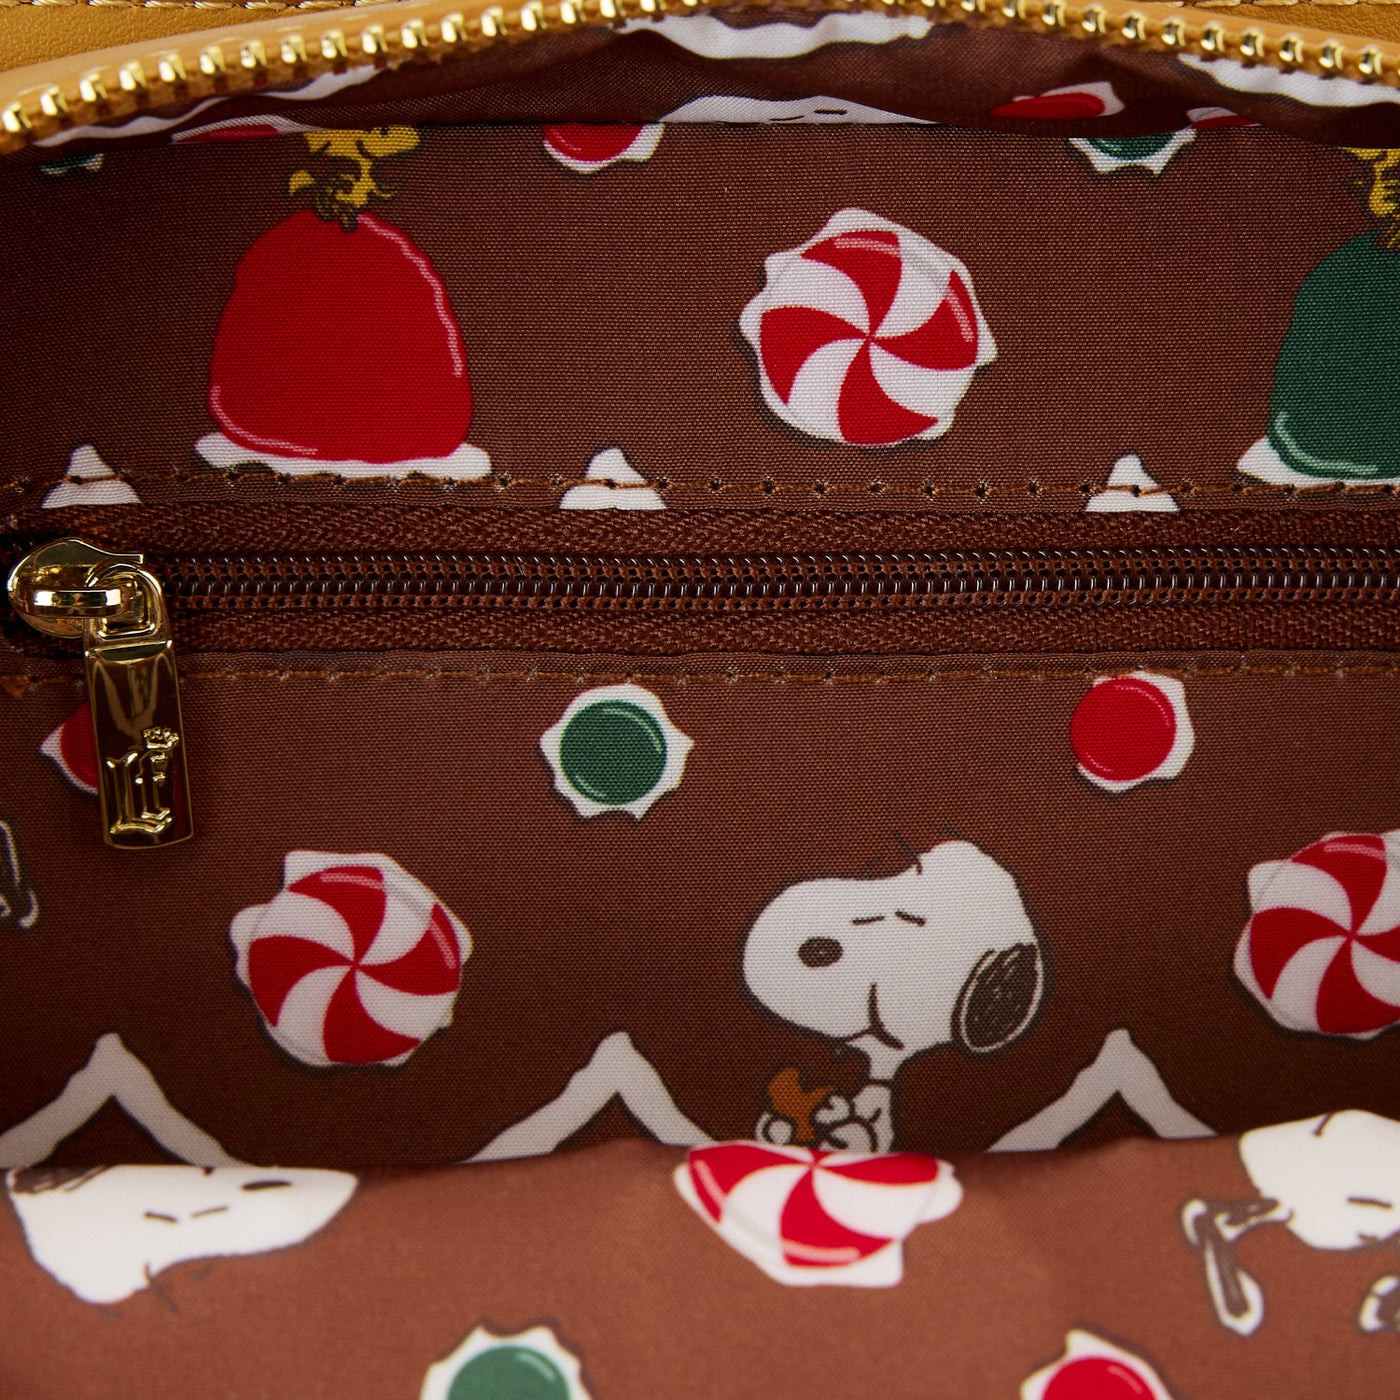 Loungefly Peanuts Snoopy Gingerbread House Figural Crossbody - Interior Lining